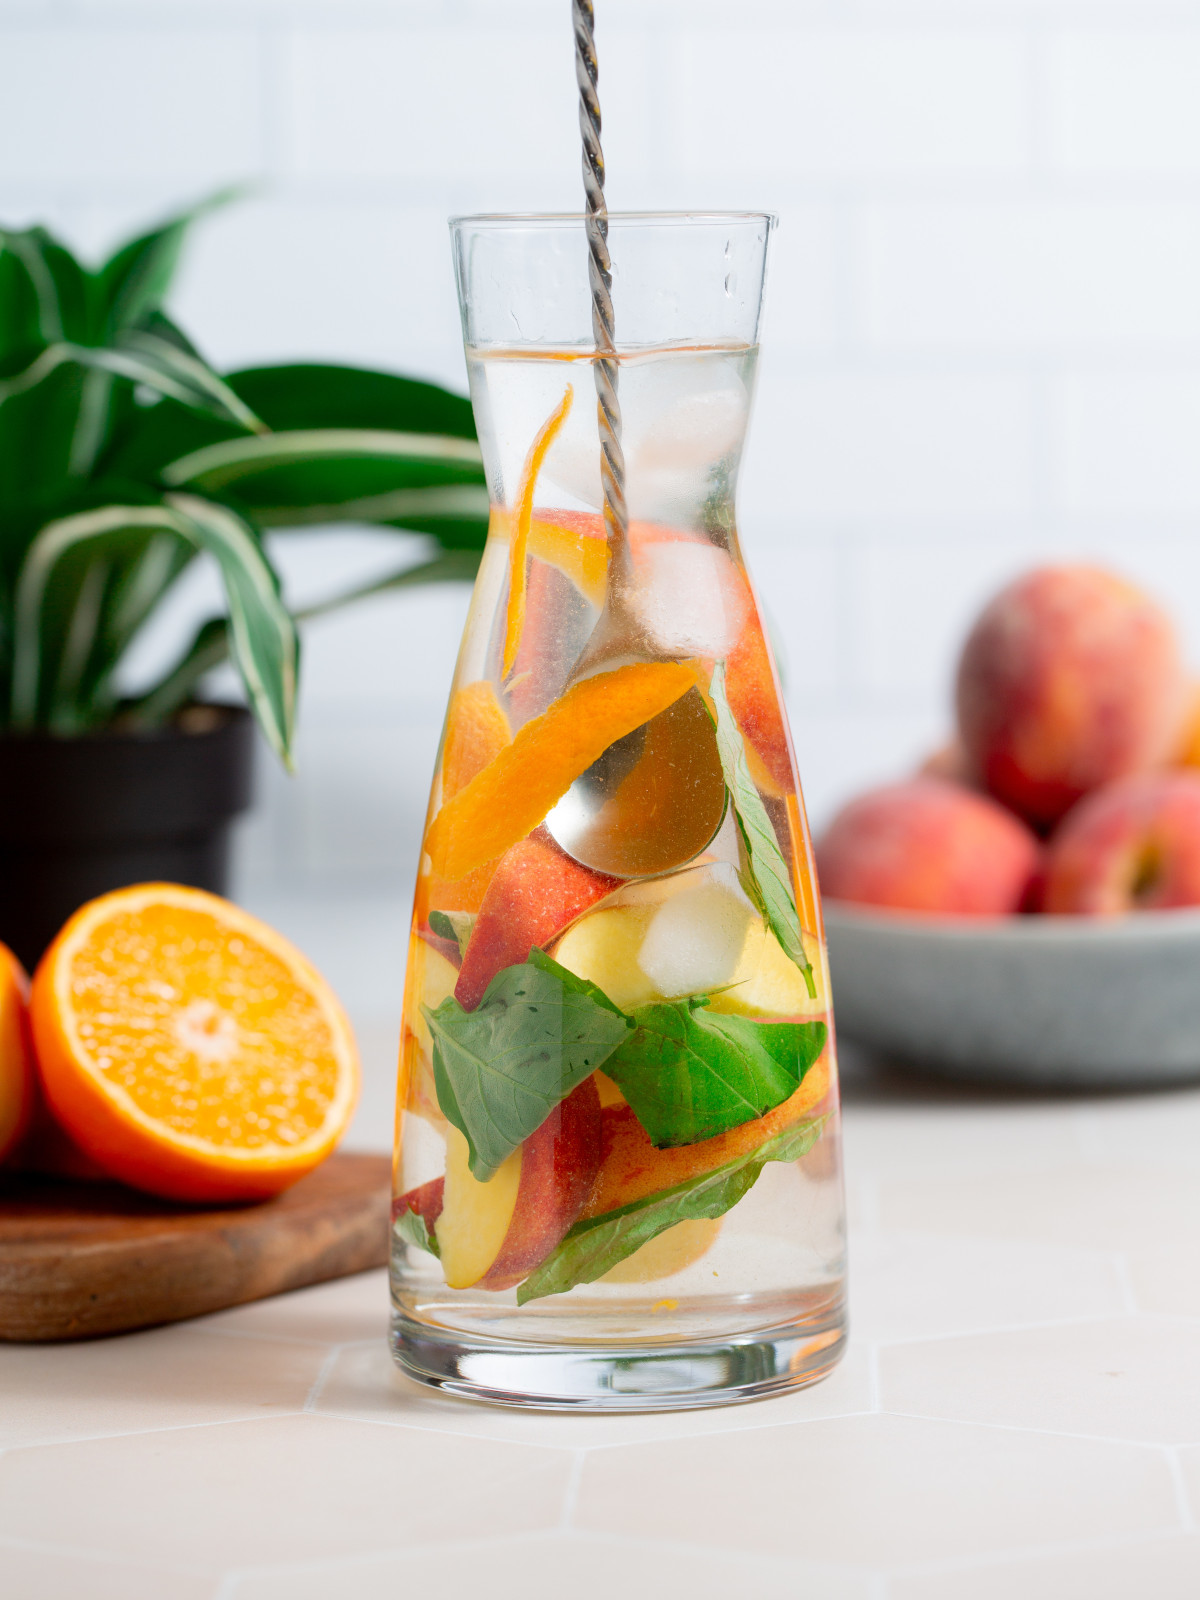 Peach infused water with basil in a glass pitcher being mixed with a spoon.